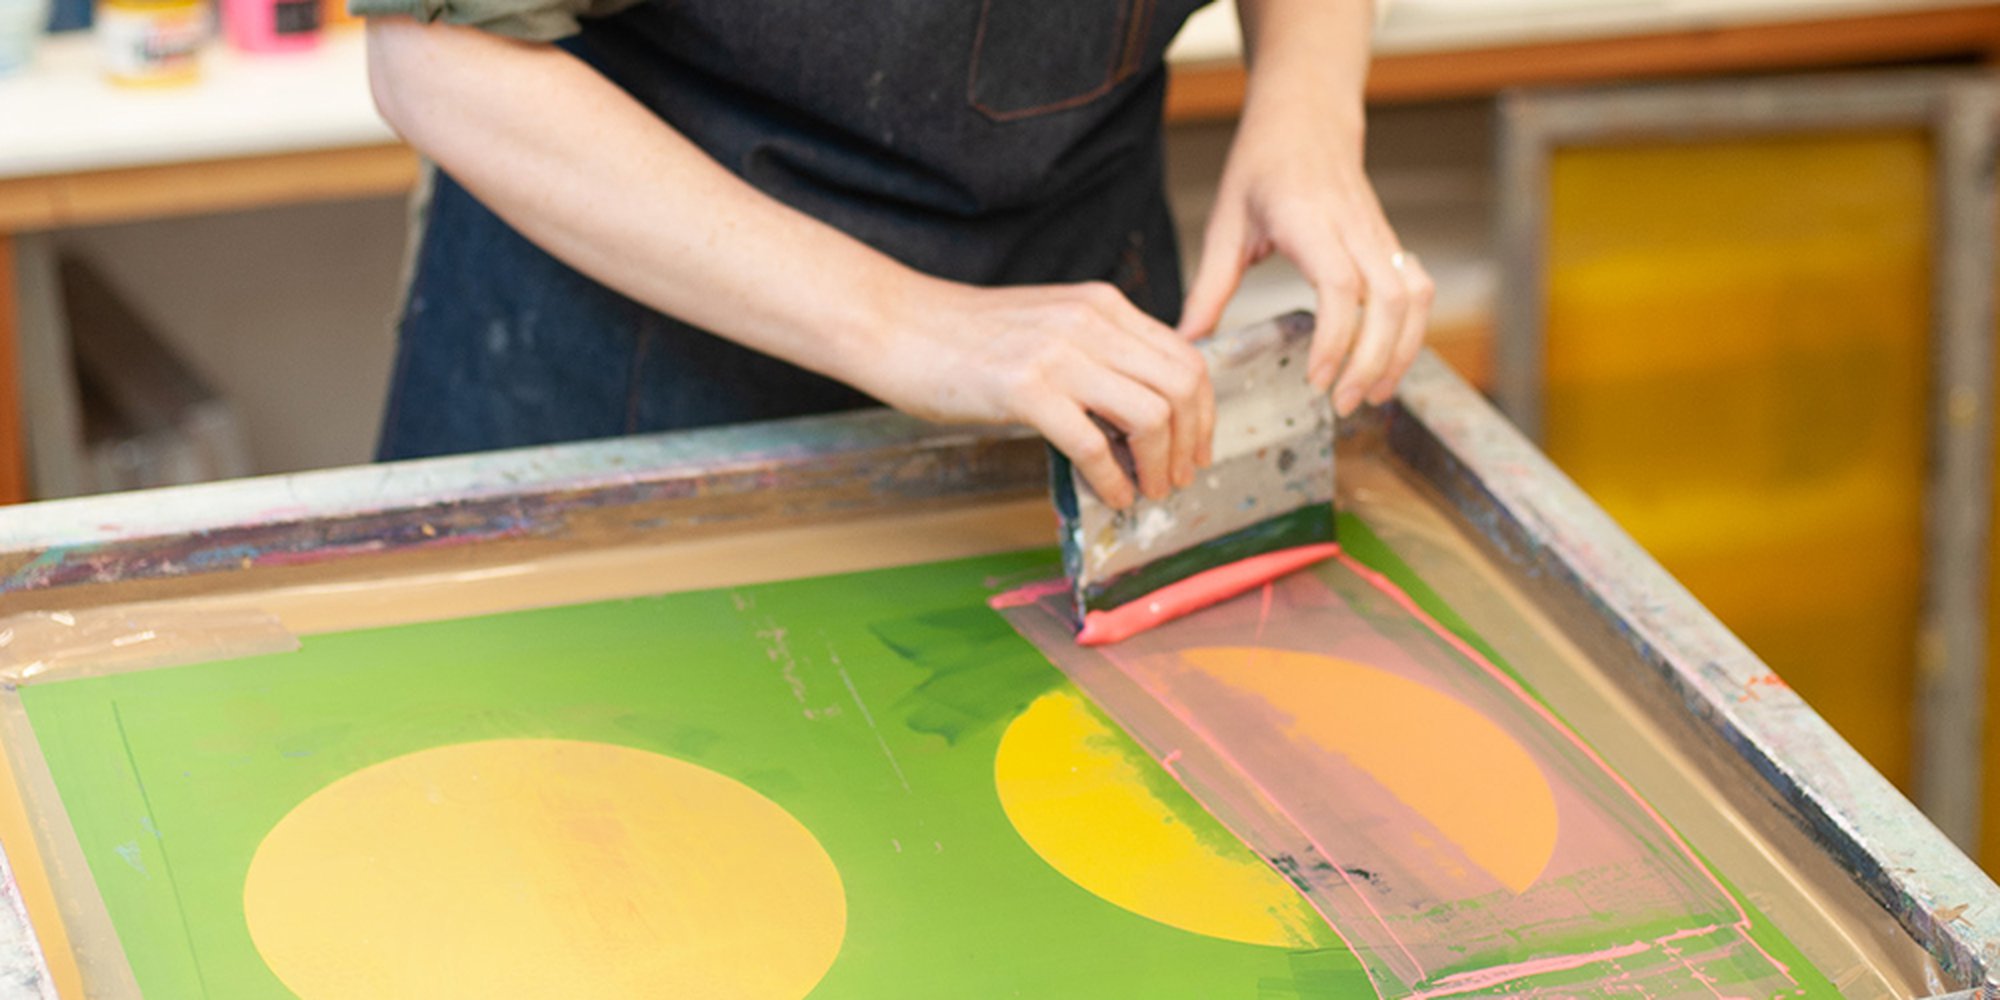 Your Guide to the Printmaking Process